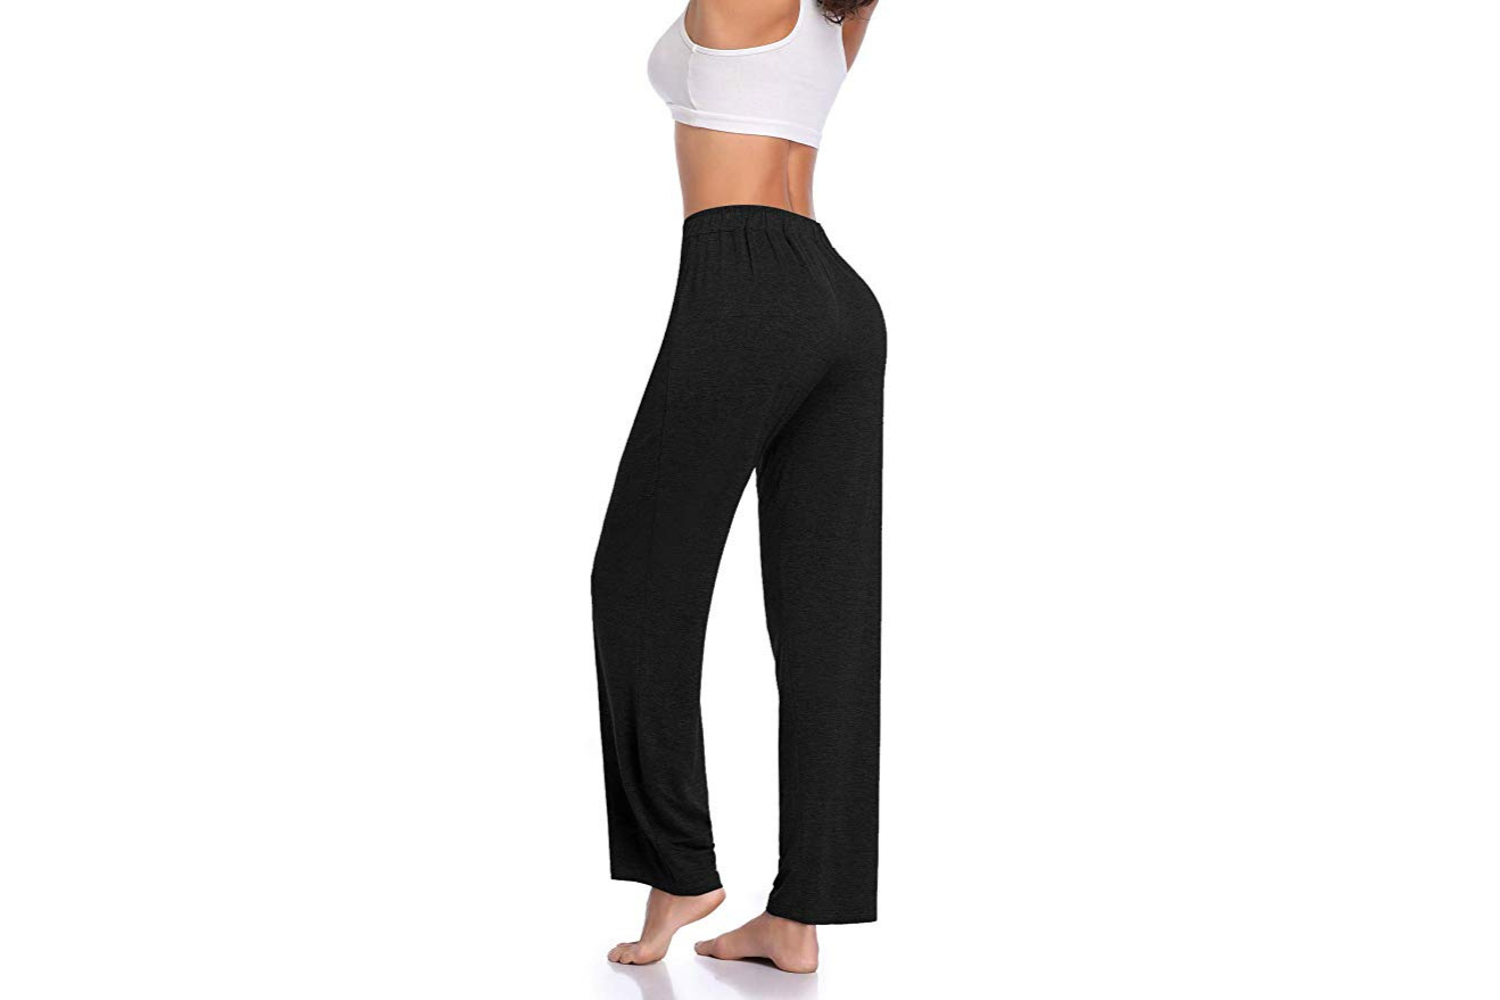 24 Best Workout Clothes for Women Over 50 in 2022